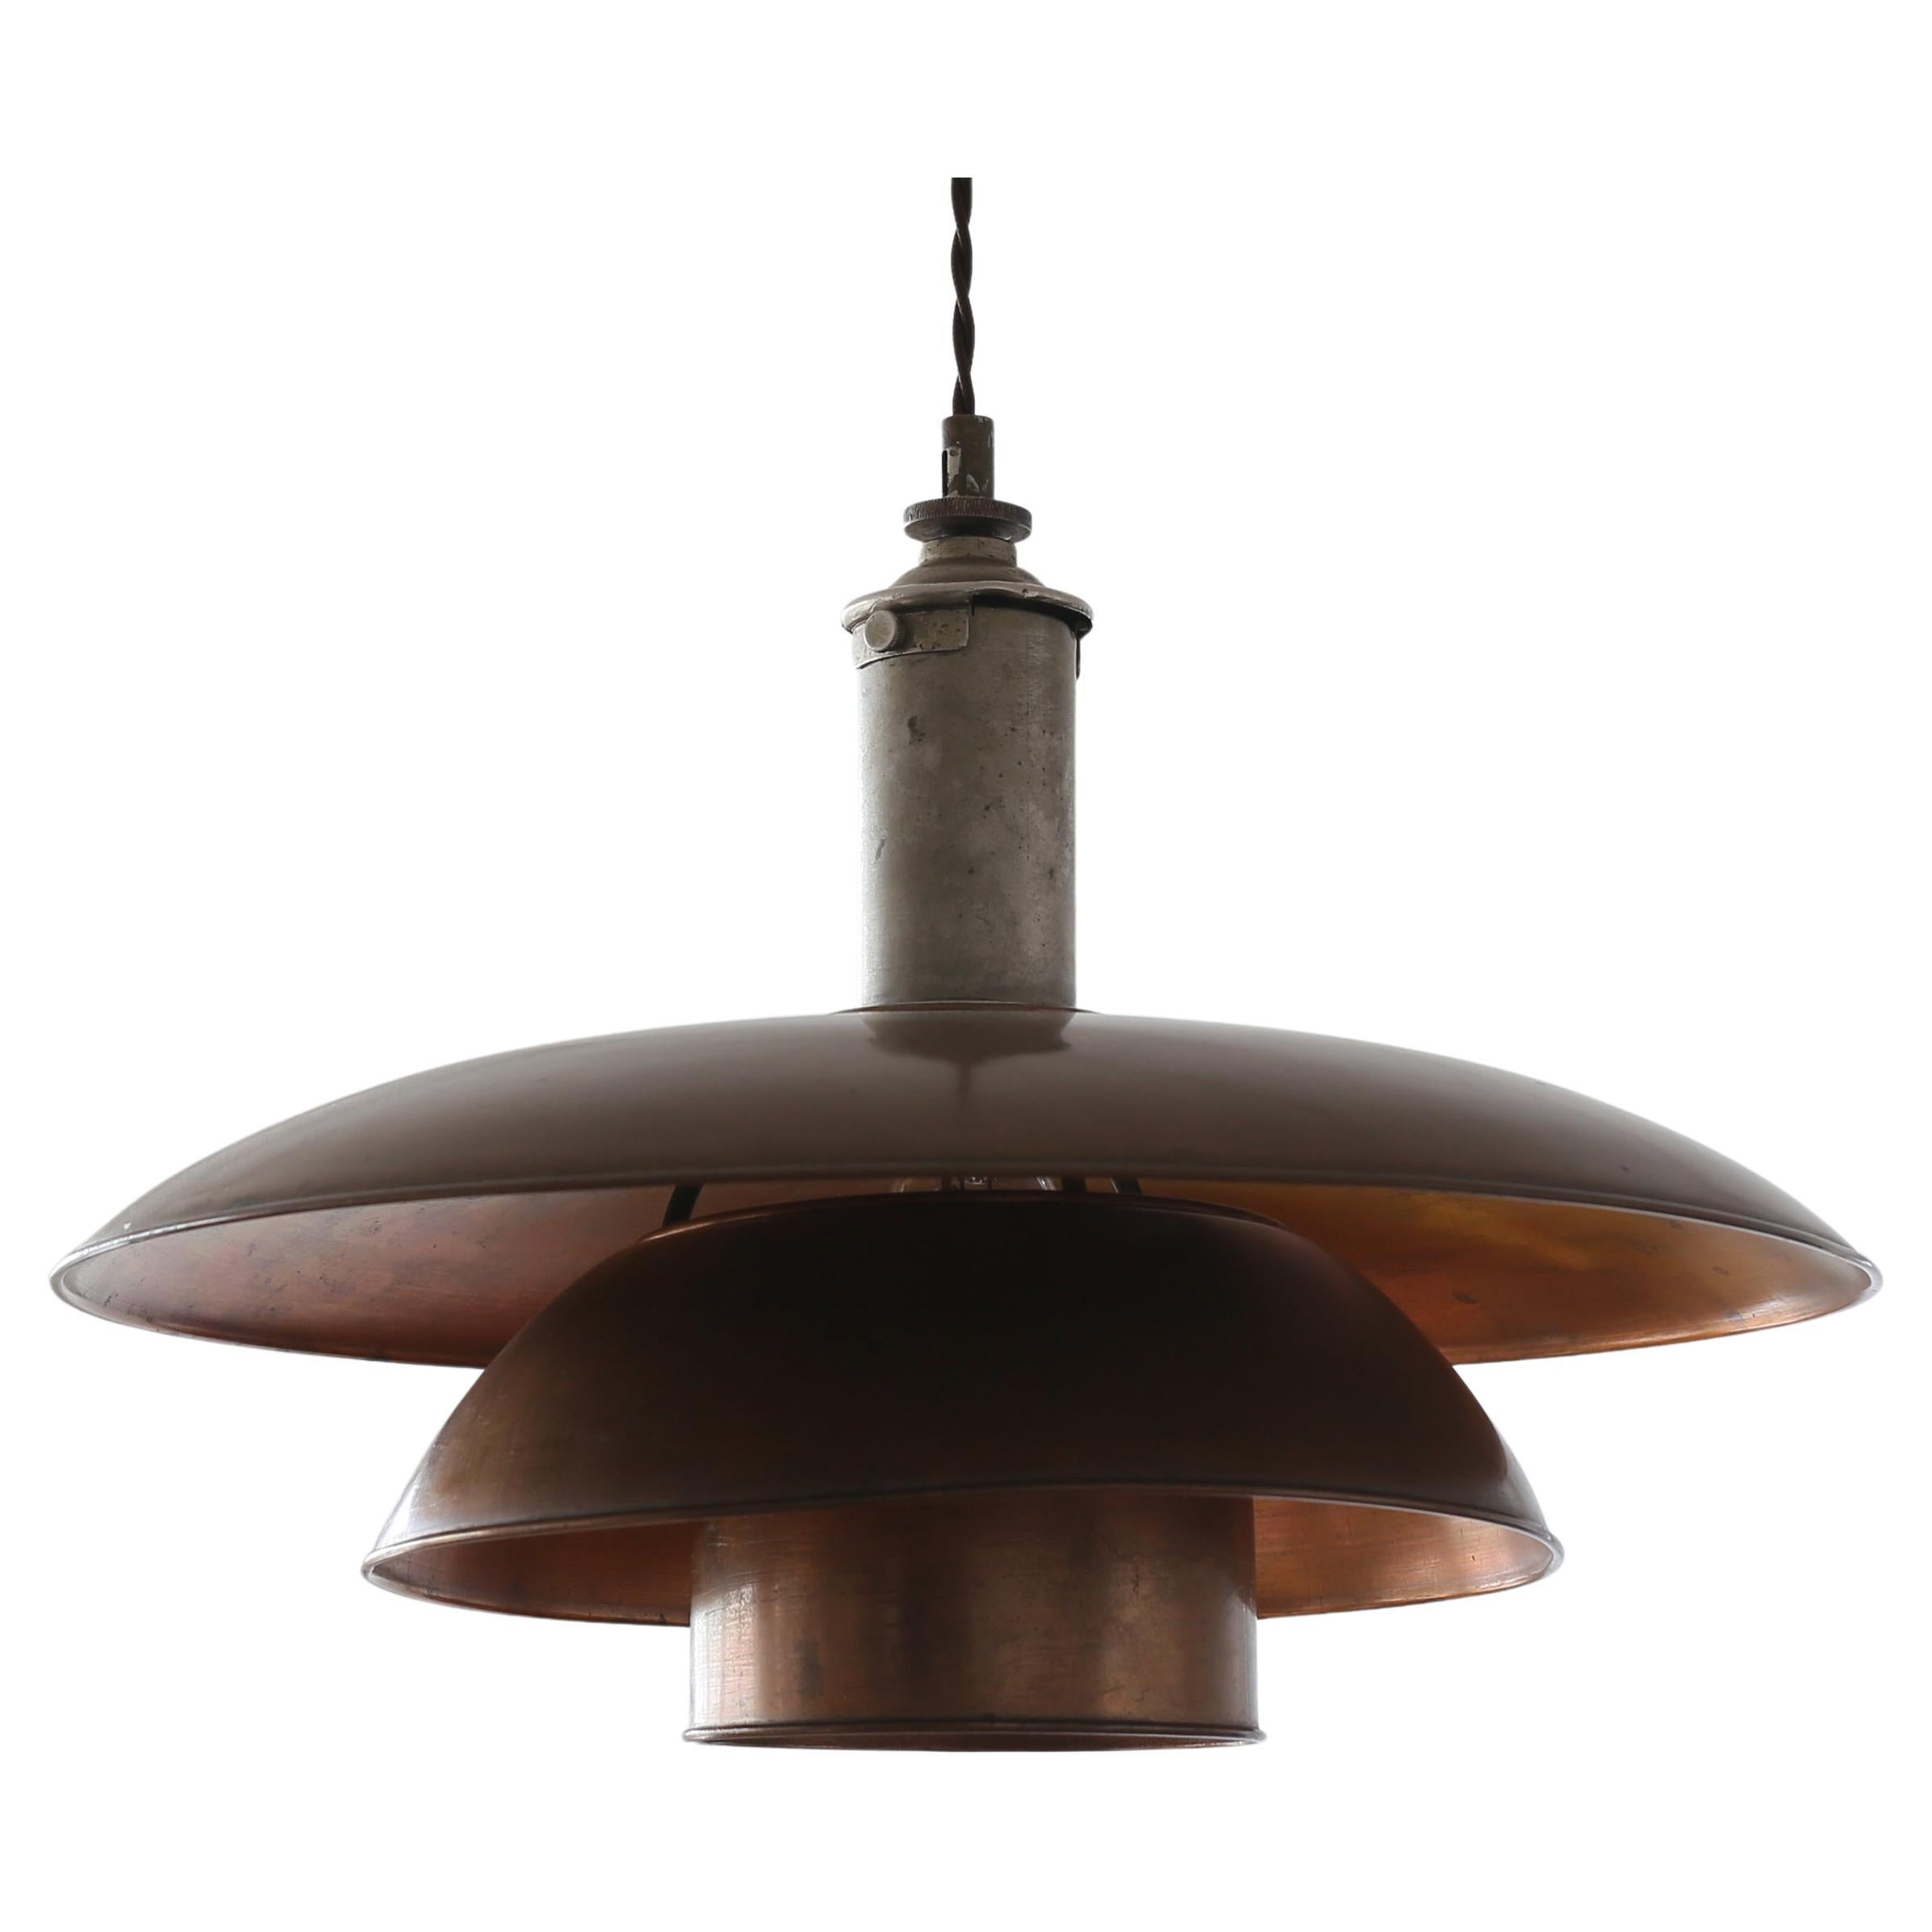 Early Poul Henningsen 4/4 Copper Ceiling Lamp, 1926